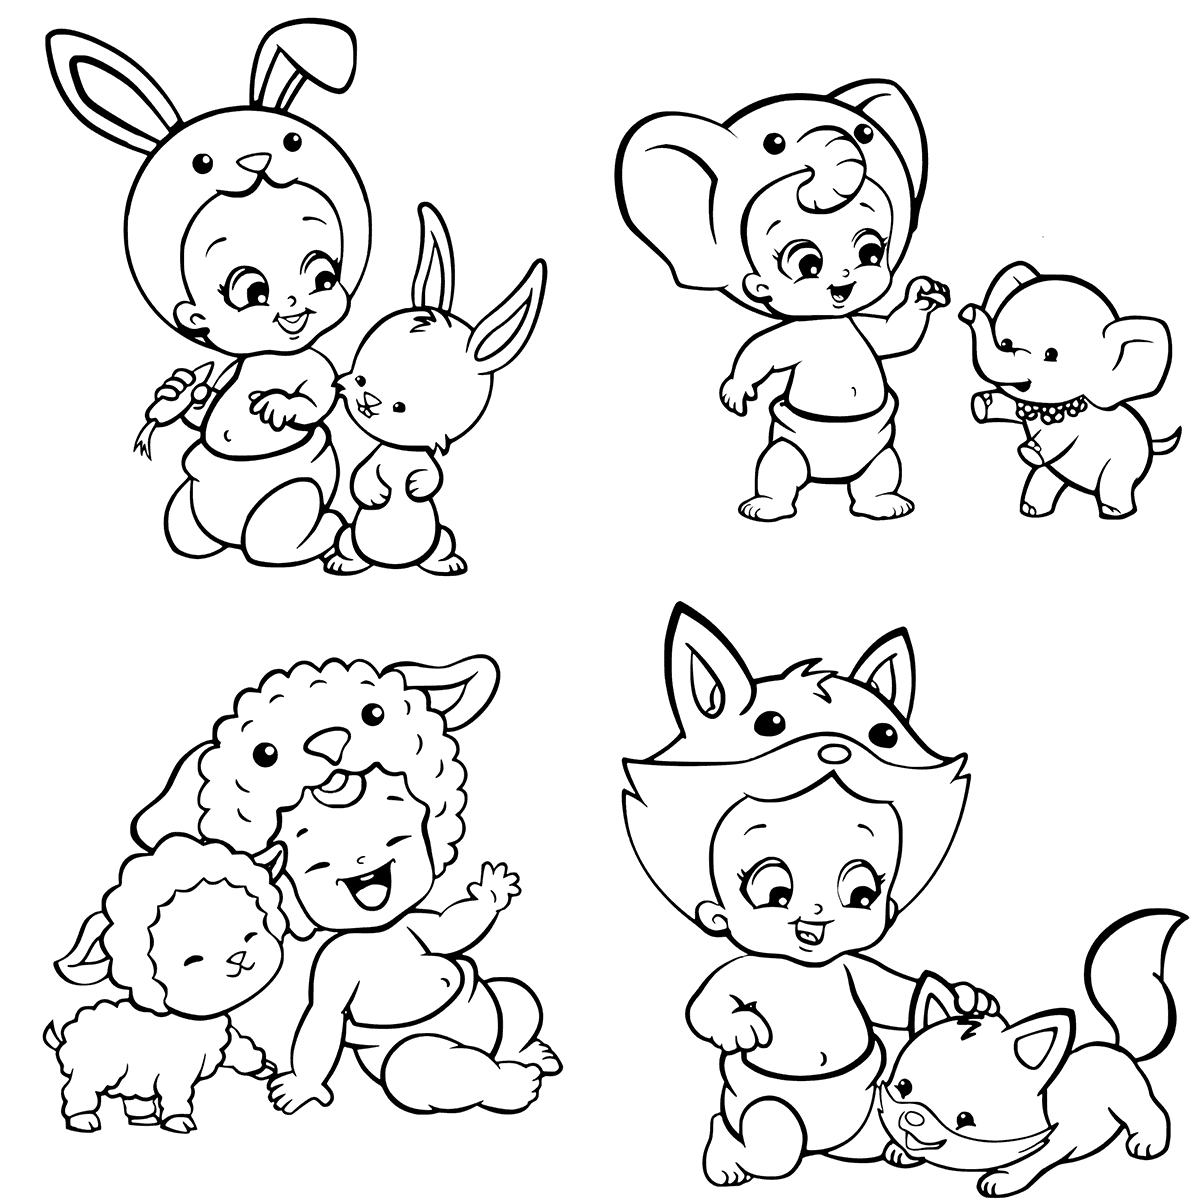 Twozies Coloring Pages at GetColorings.com | Free printable colorings